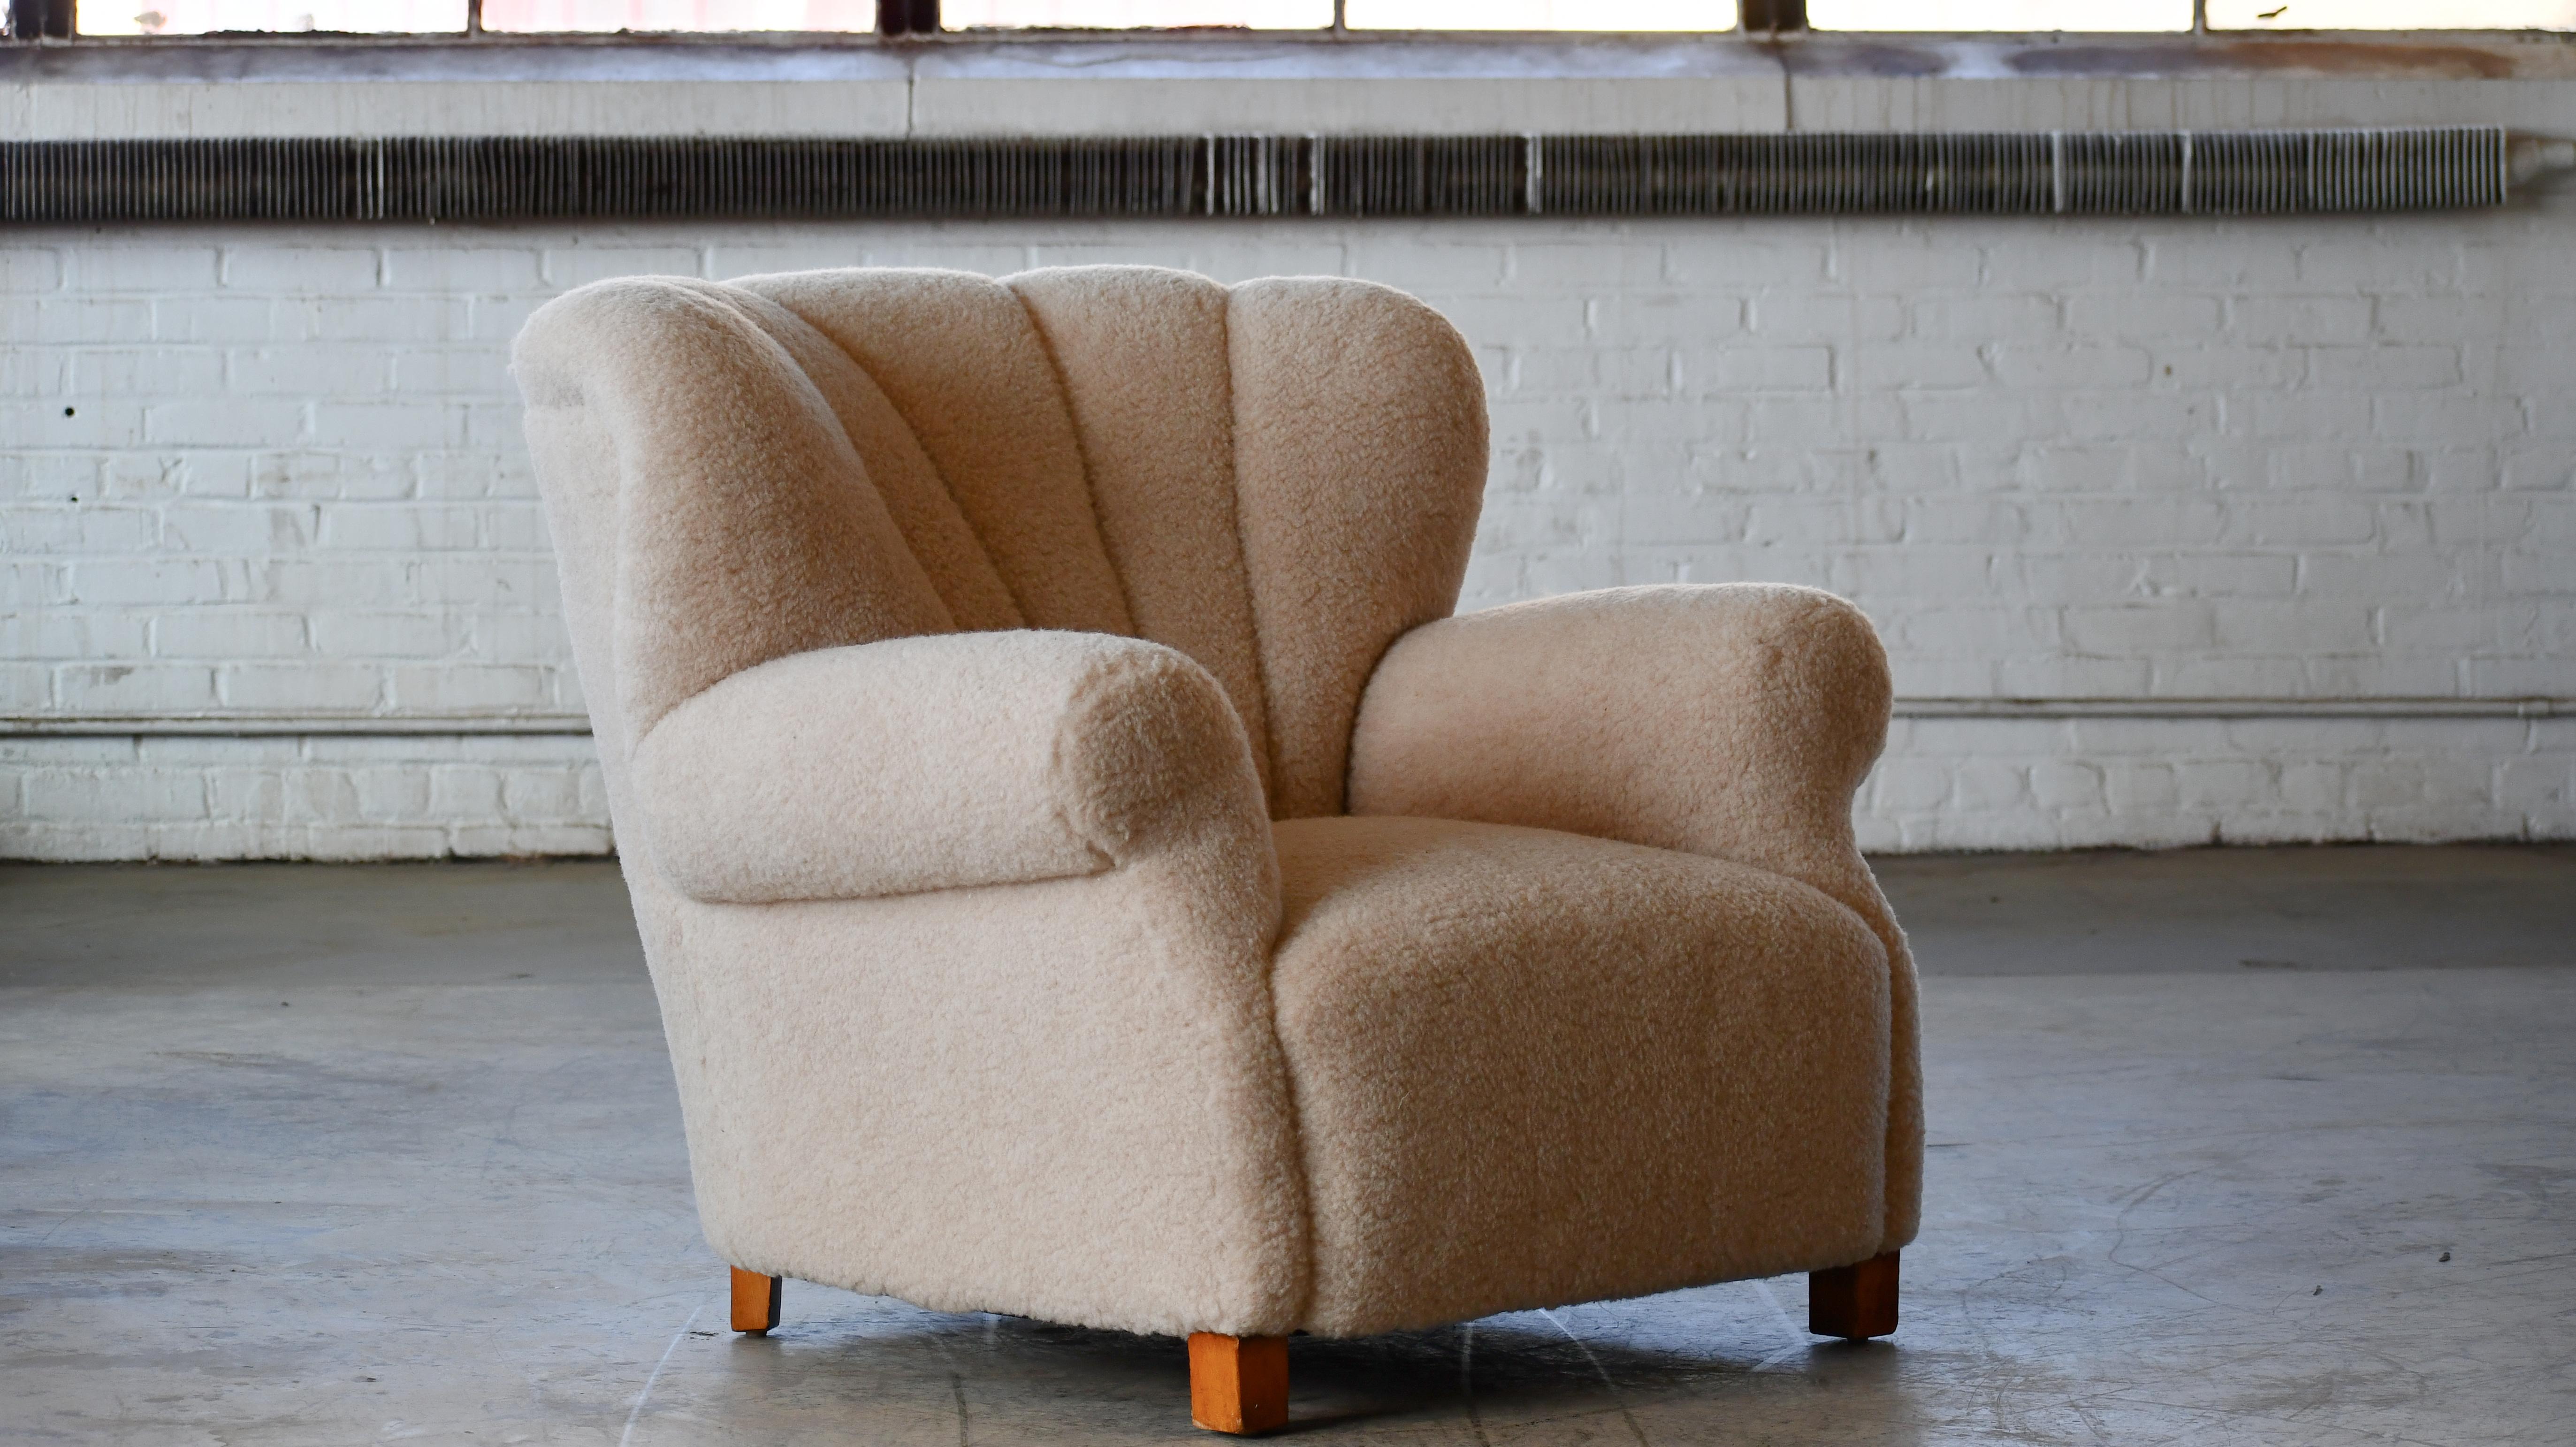 Sublime large club chair model 1518 club chair made by Fritz Hansen in the late 1930s or early 1940s. This model came in two heights - this being the lower back model. Superbly comfortable the chair with its dramatically low and wide proportions has